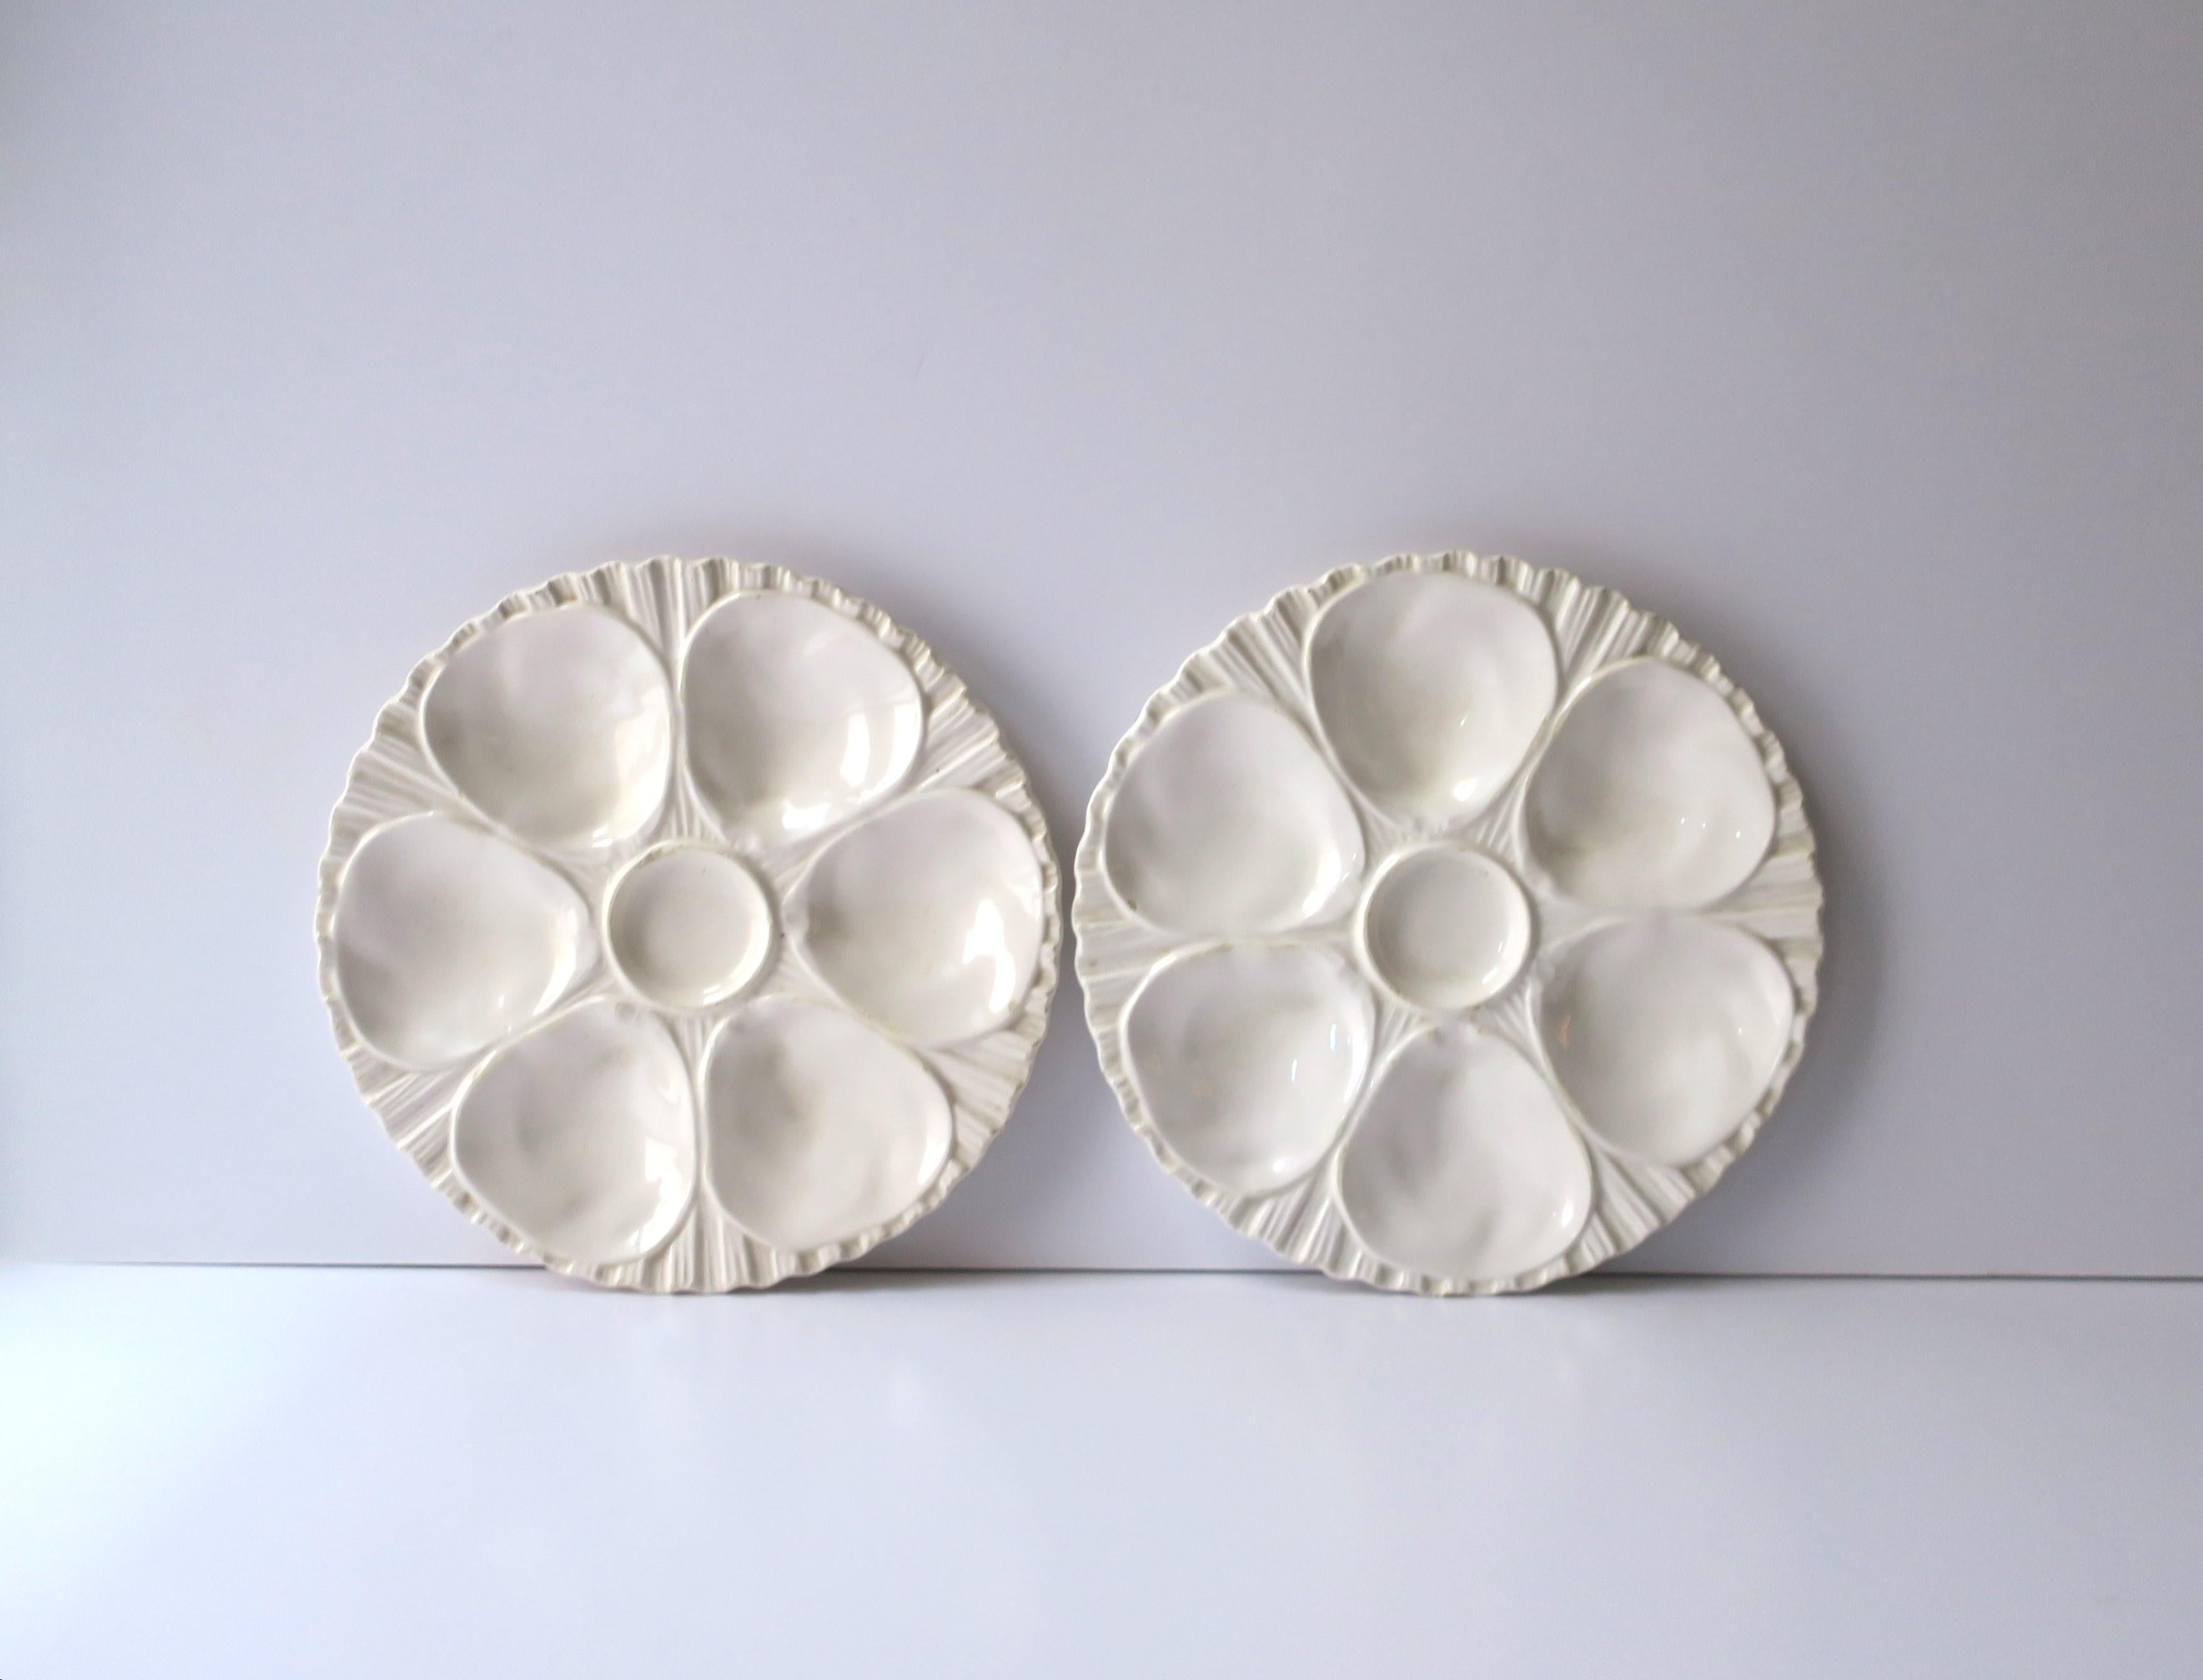 A beautiful pair of all white/off-white porcelain oyster plates, circa early to mid-20th century, Europe. Plates are white porcelain with 6 wells around, a center area for condiment, and a textured base/edge area. Great to use/serve oysters,